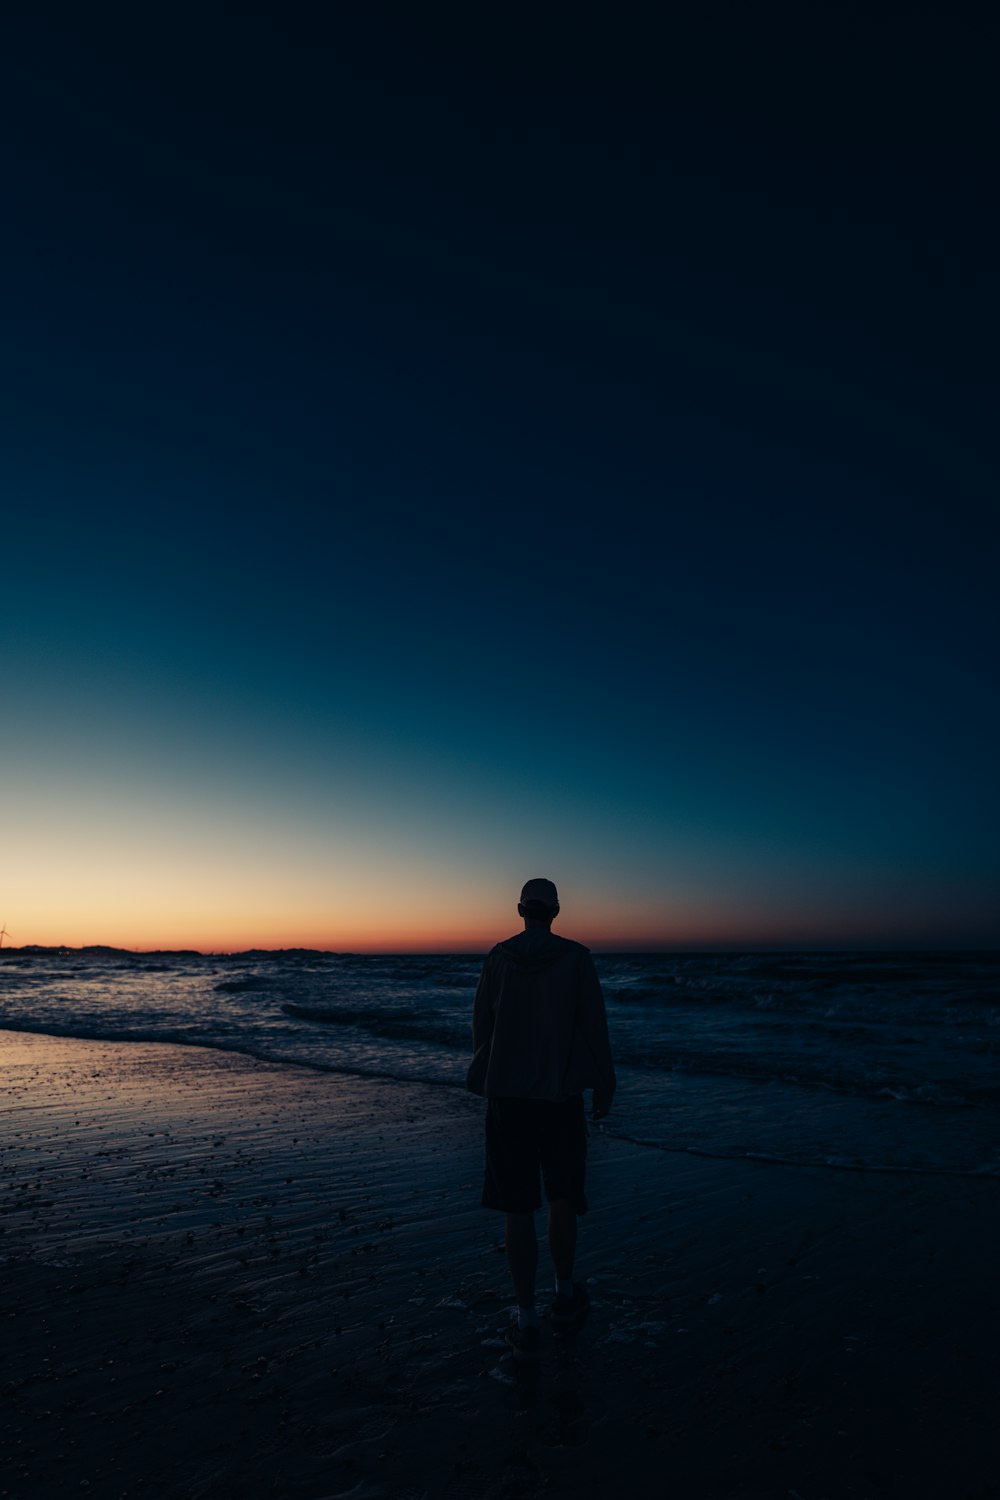 a person standing on a beach at night